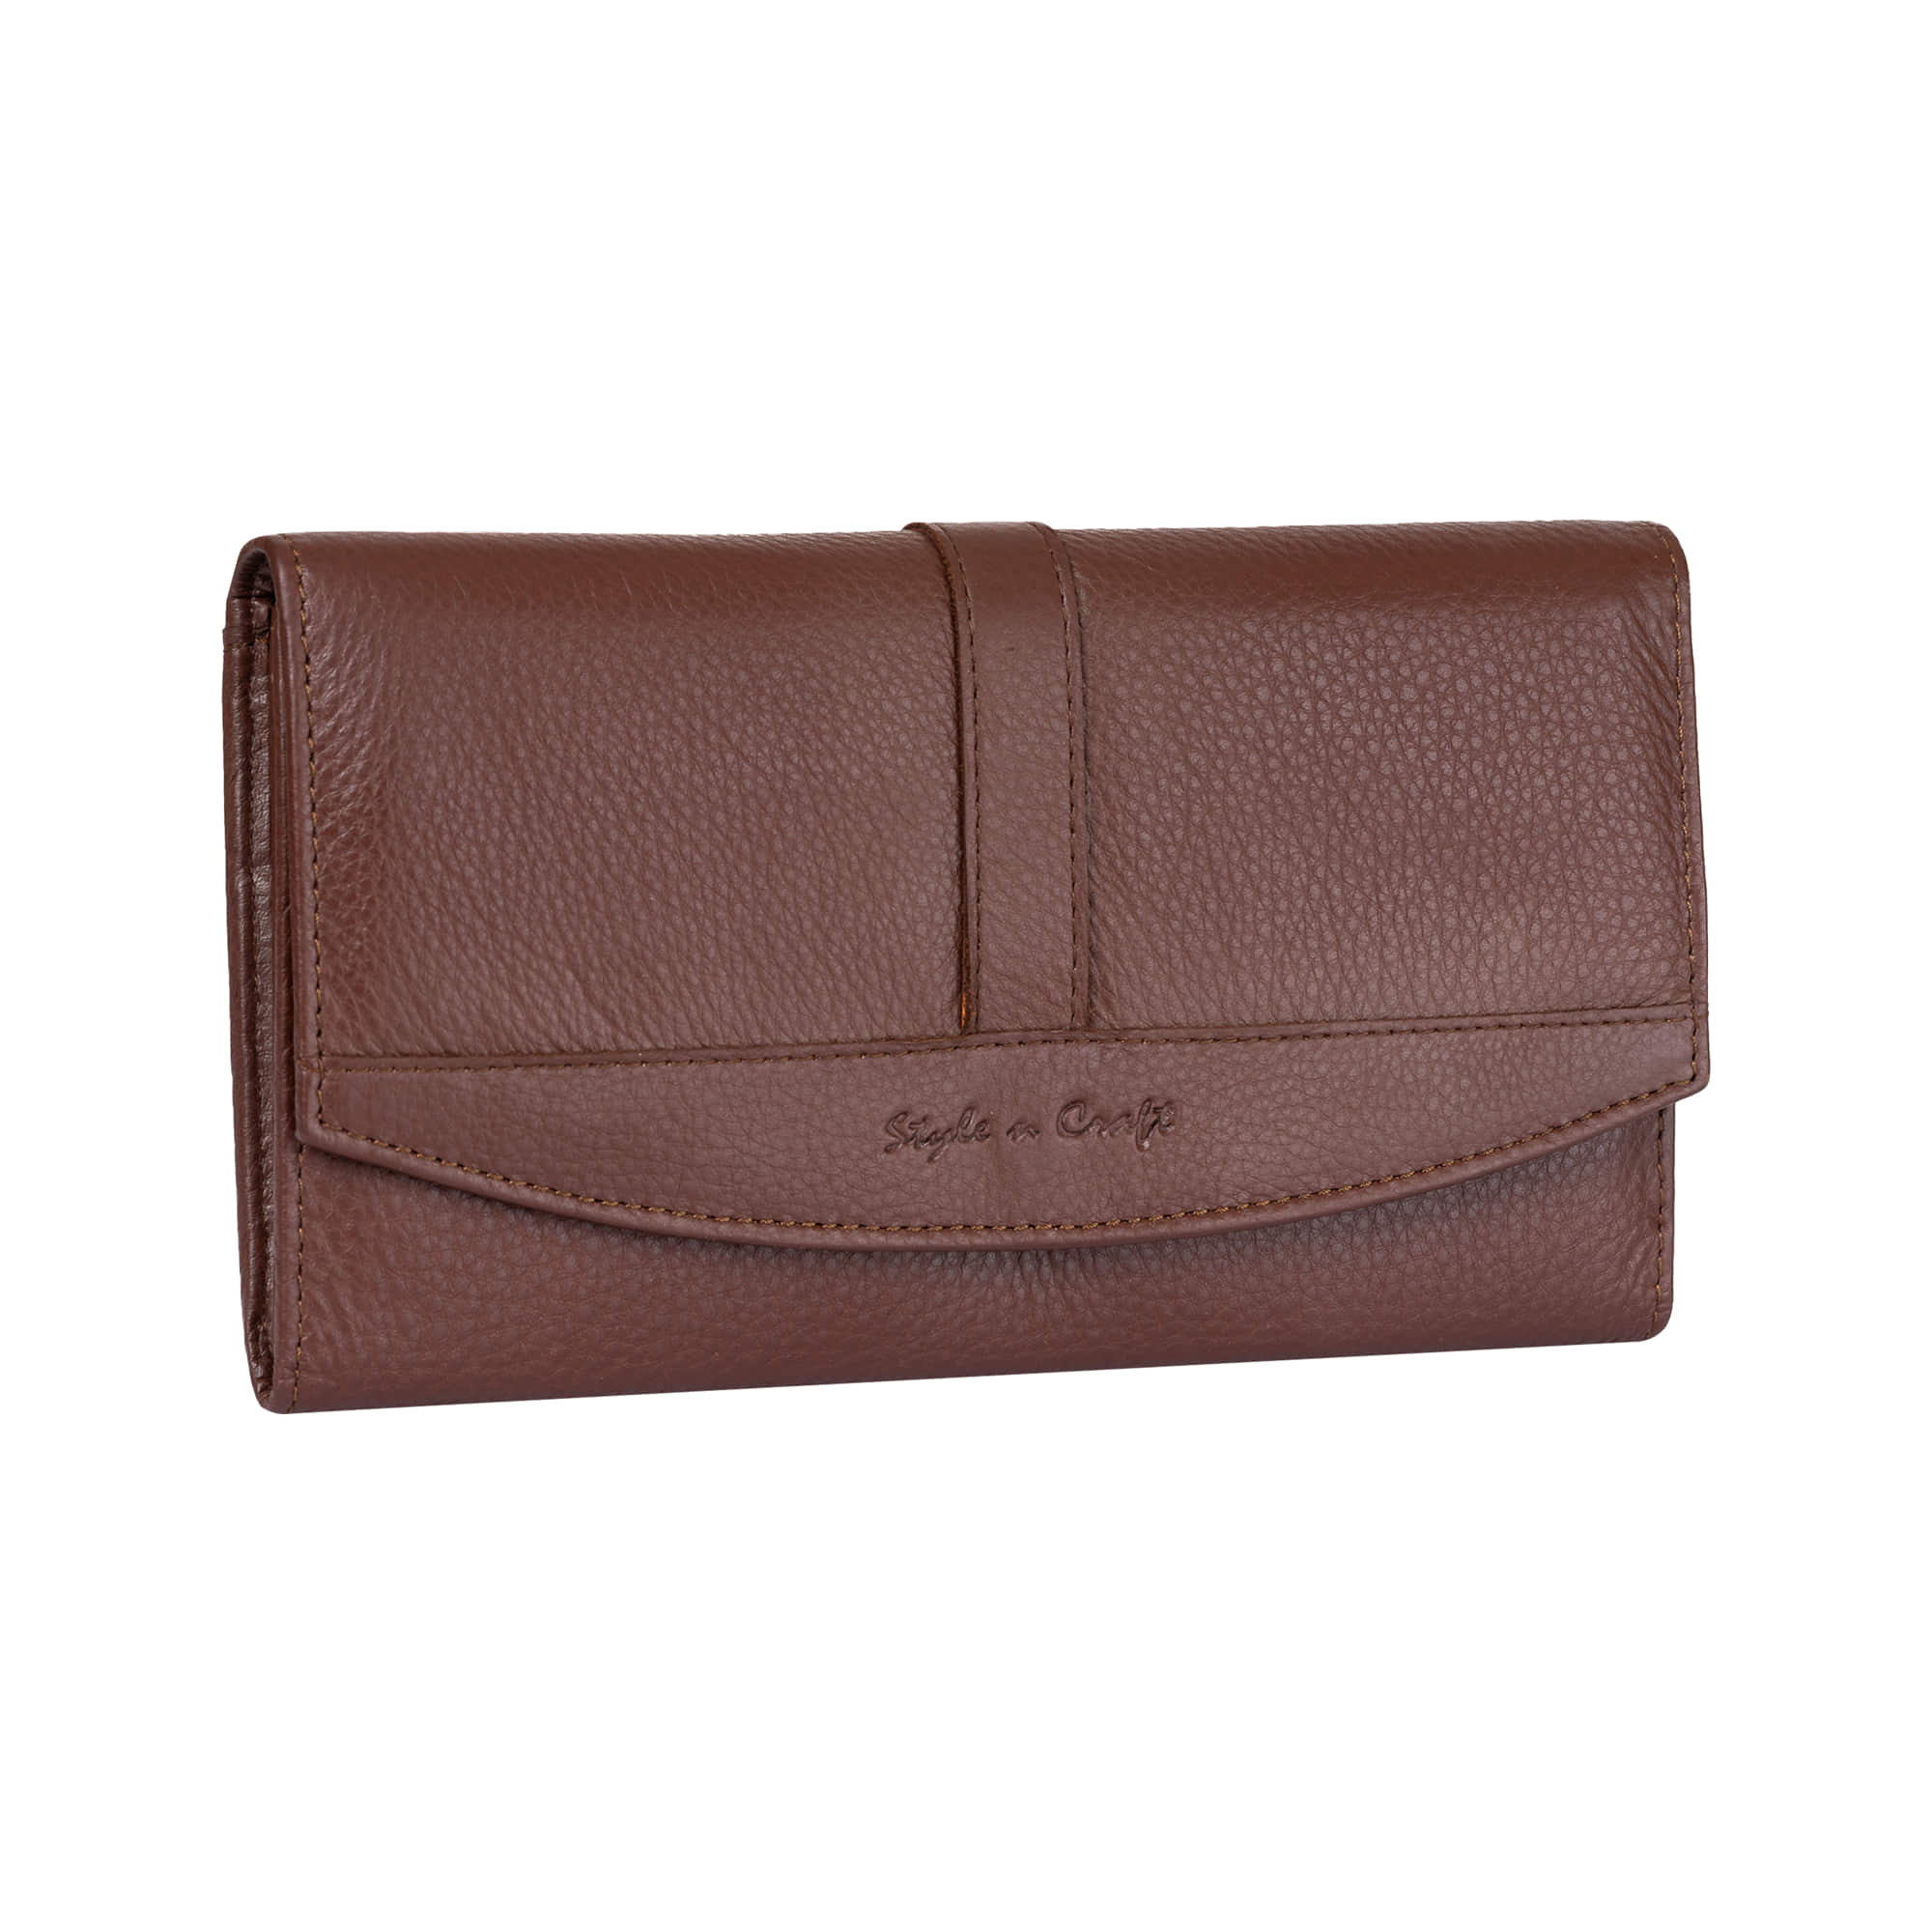  Style n Craft Ladies Clutch Wallet, Full-Grain Leather Wallet  for Women, RFID-Protected Wallet with Multiple Card Holders, Tan  (300953-CG) : Clothing, Shoes & Jewelry